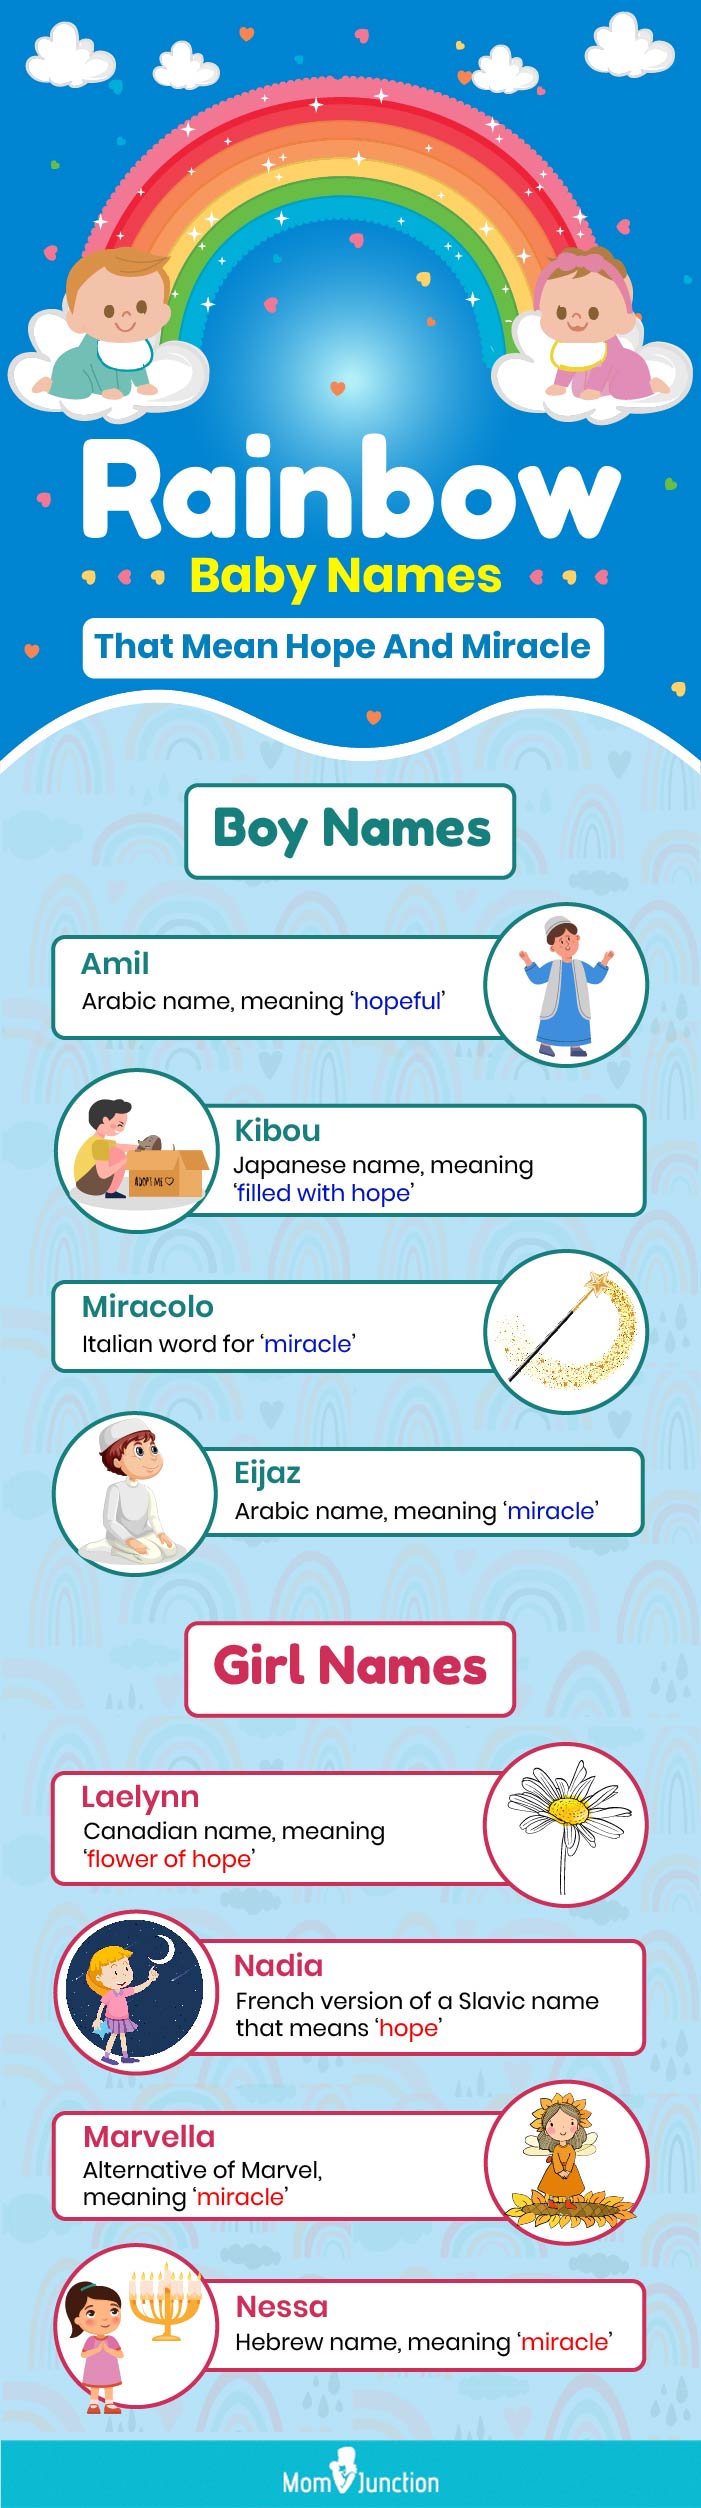 rainbow baby names that mean hope and miracle [infographic]